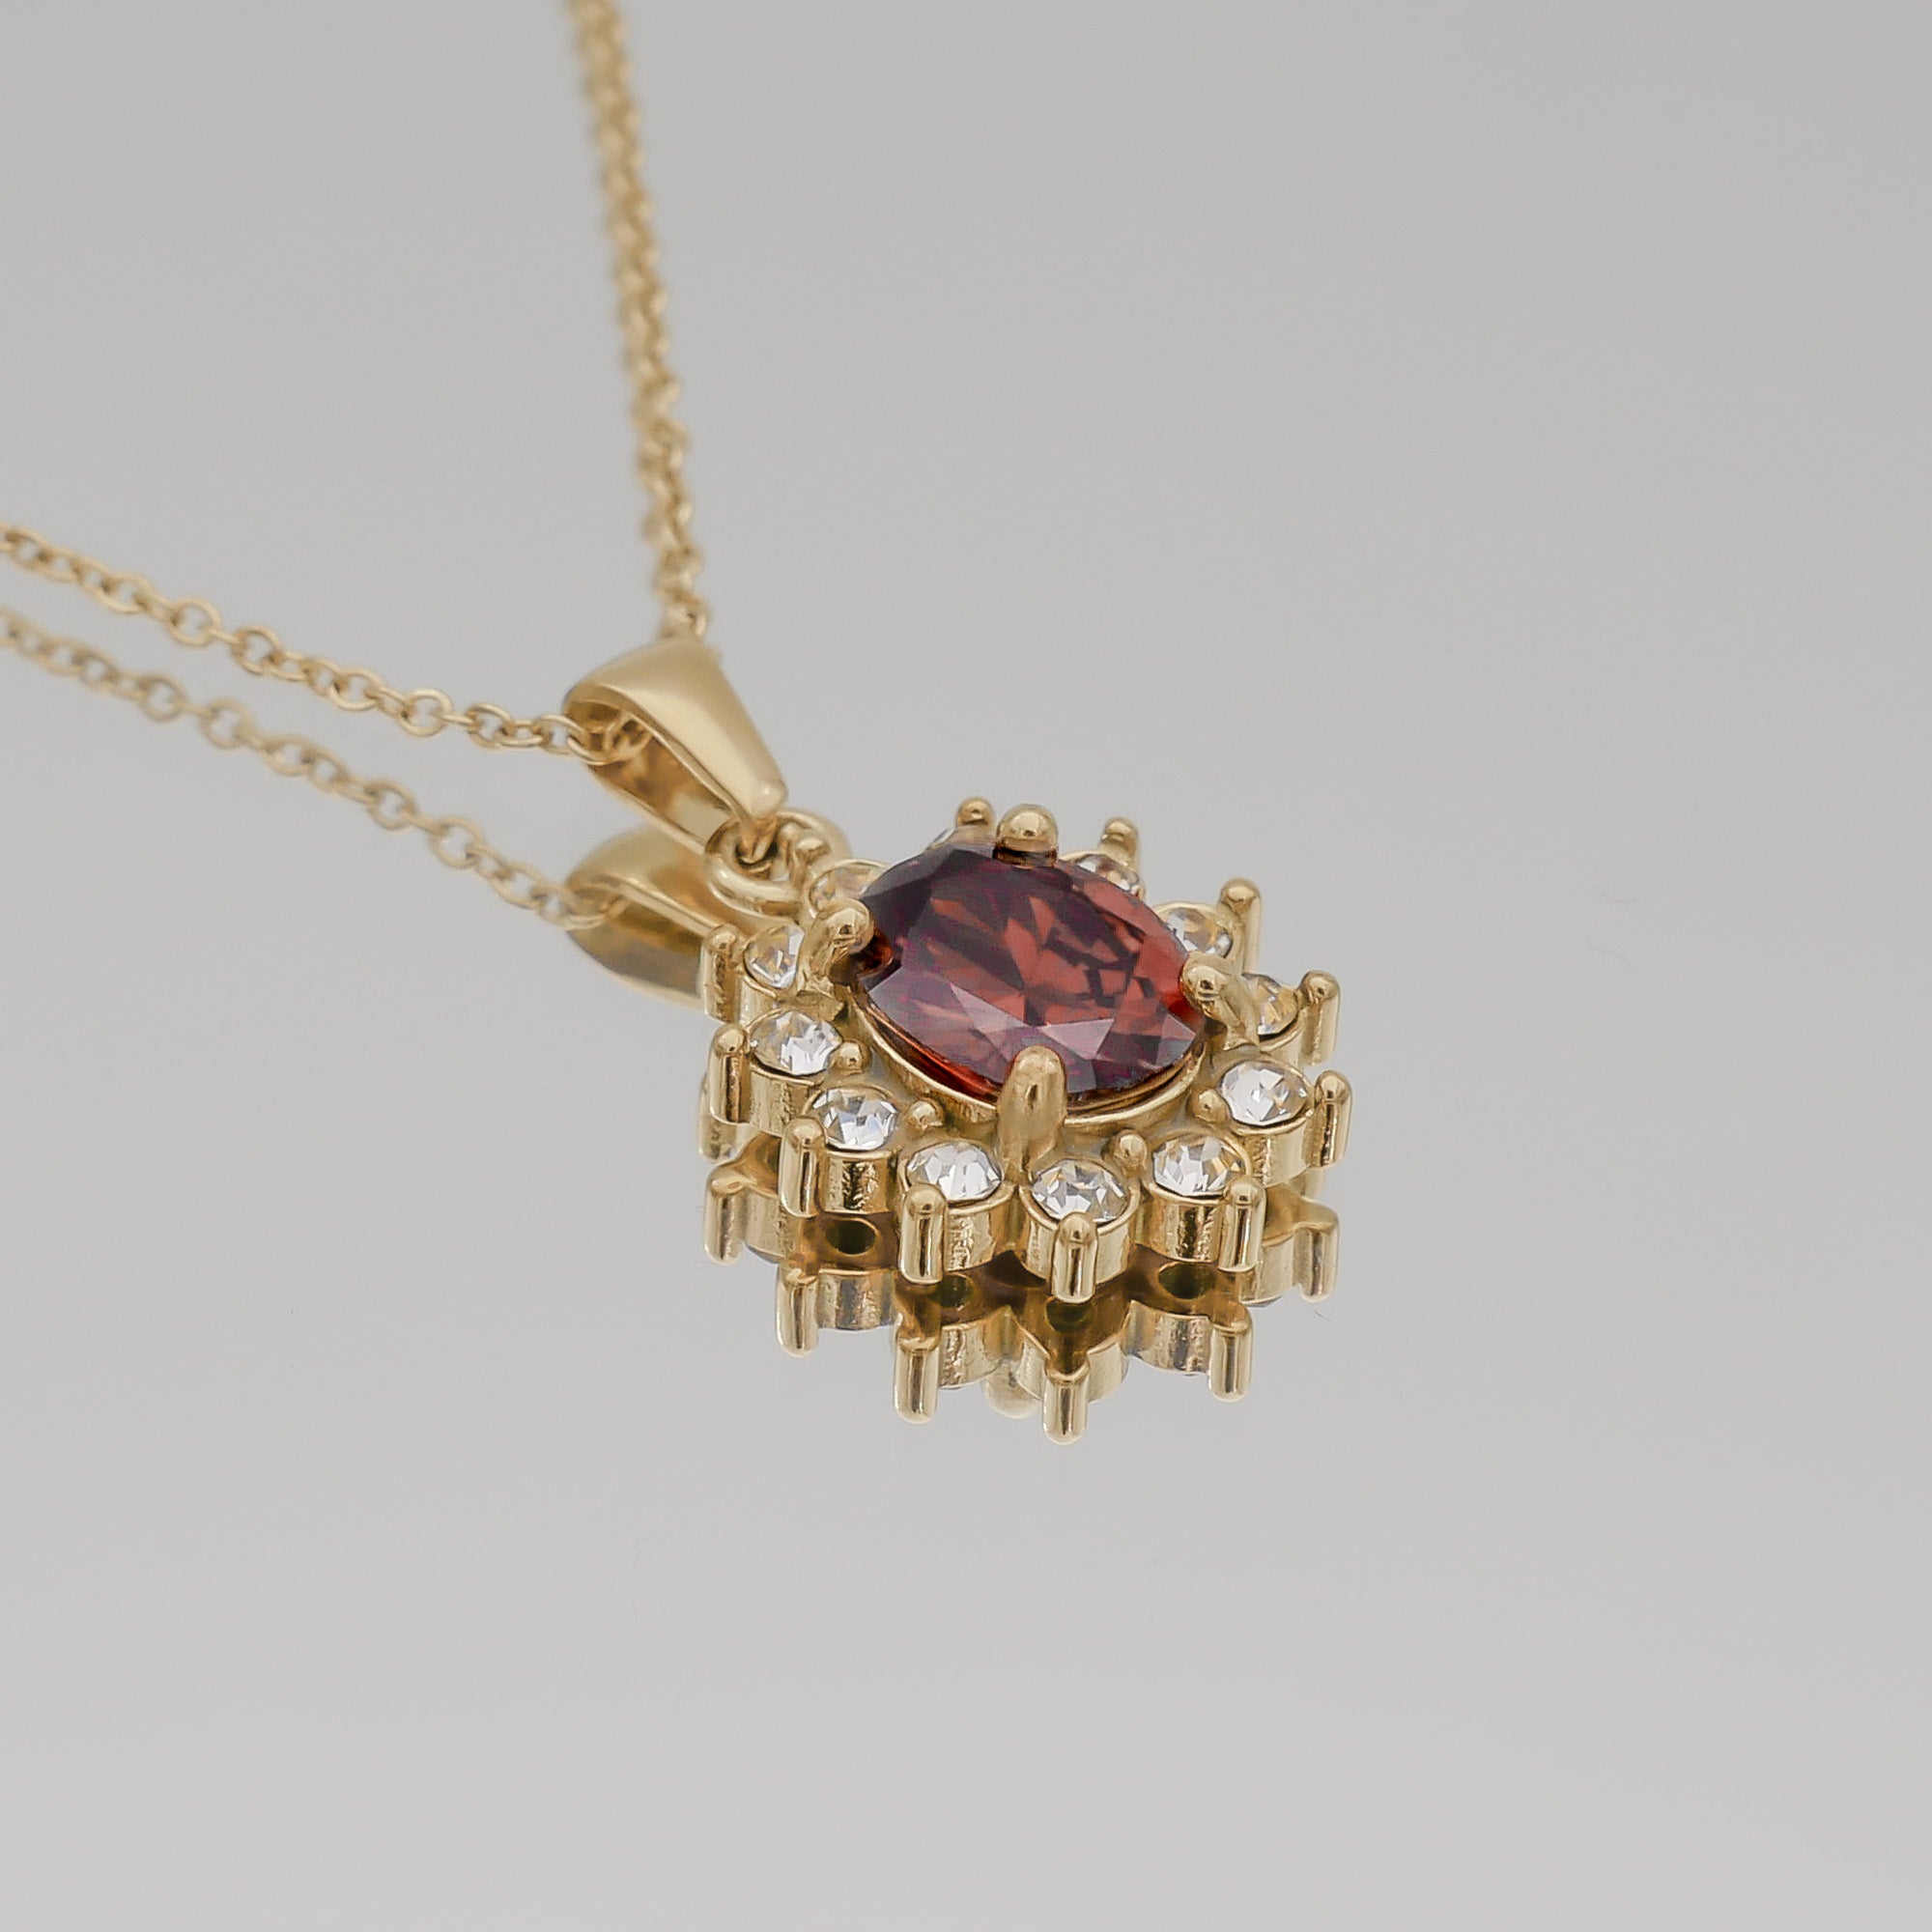 Gold Phoebe Ruby Gemstone Pendant Necklace with encrusted cubic Zirconia stones by PRYA